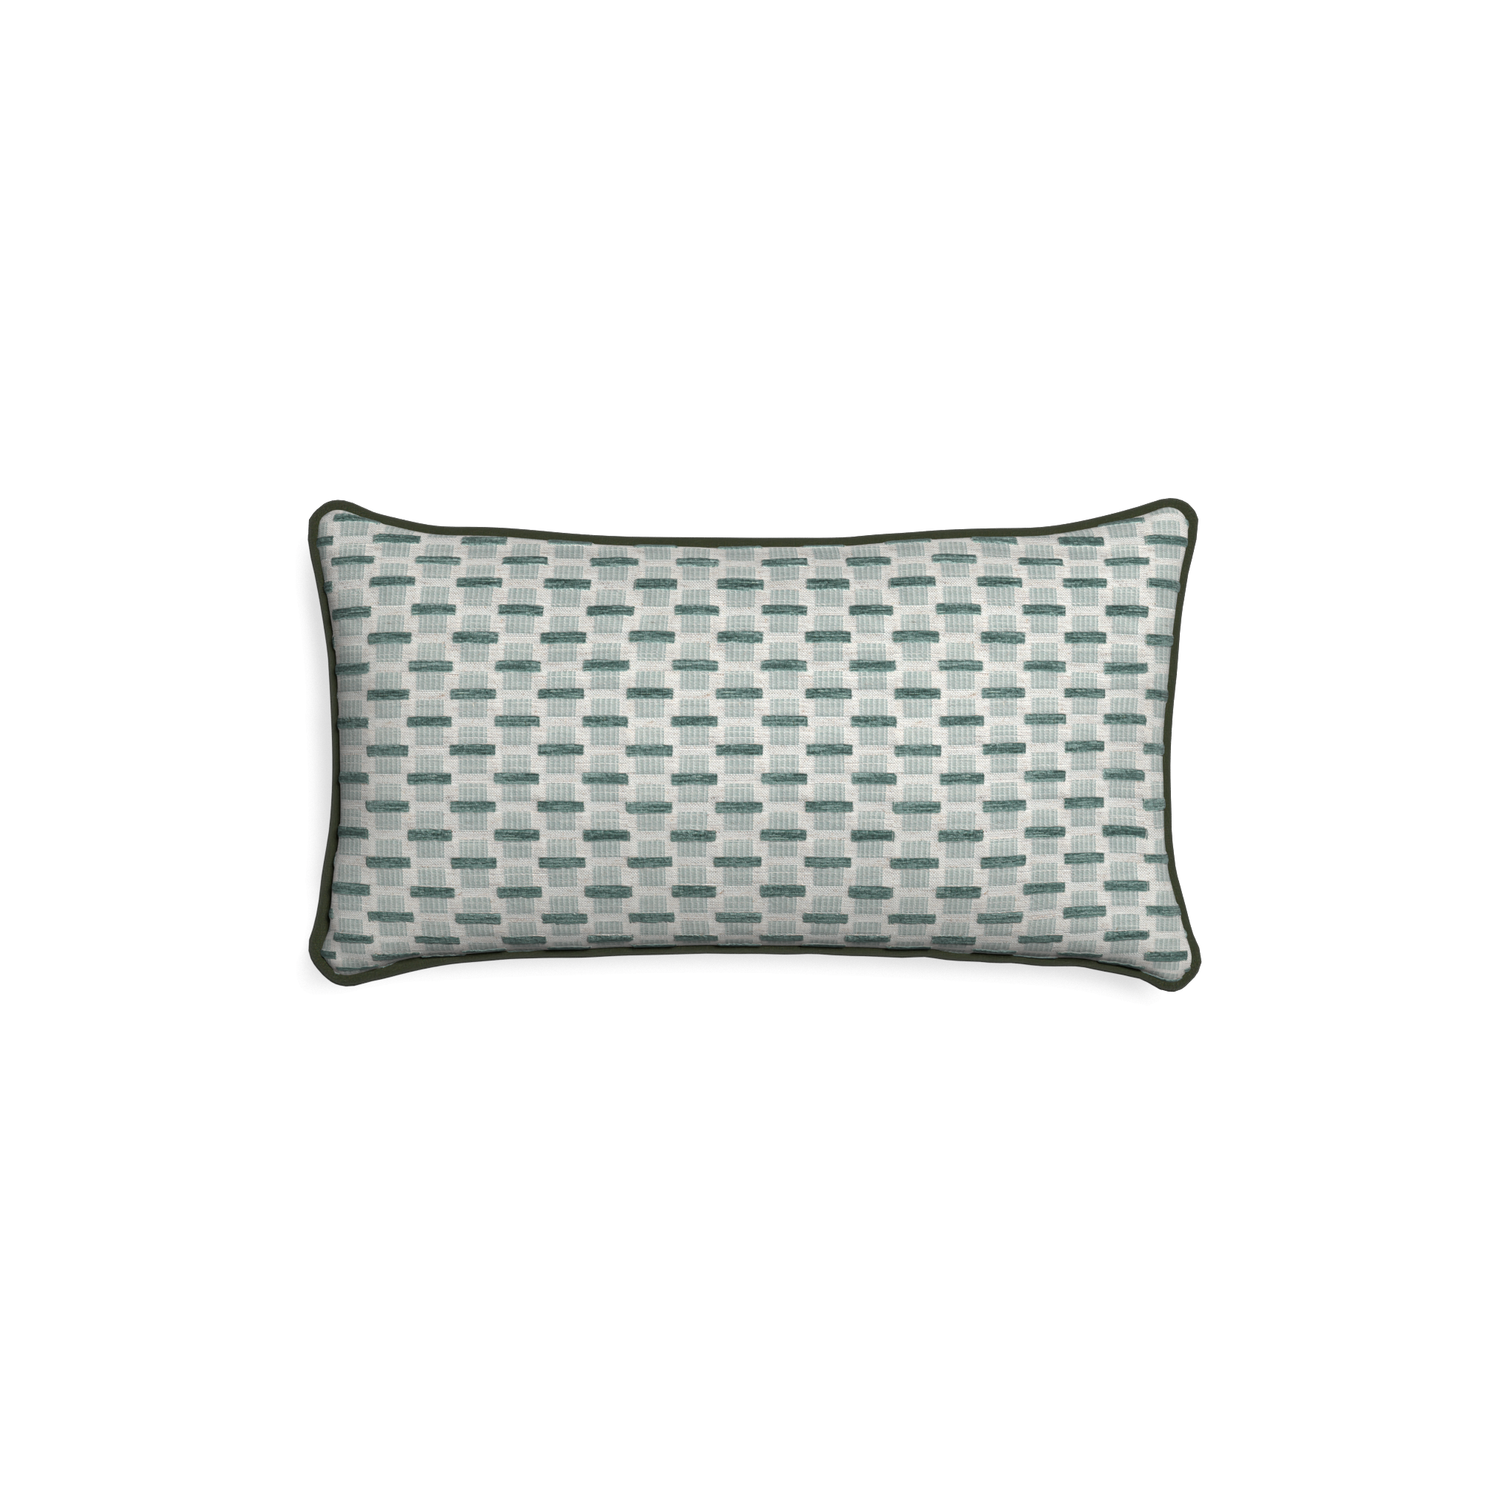 Petite-lumbar willow mint custom green geometric chenillepillow with f piping on white background